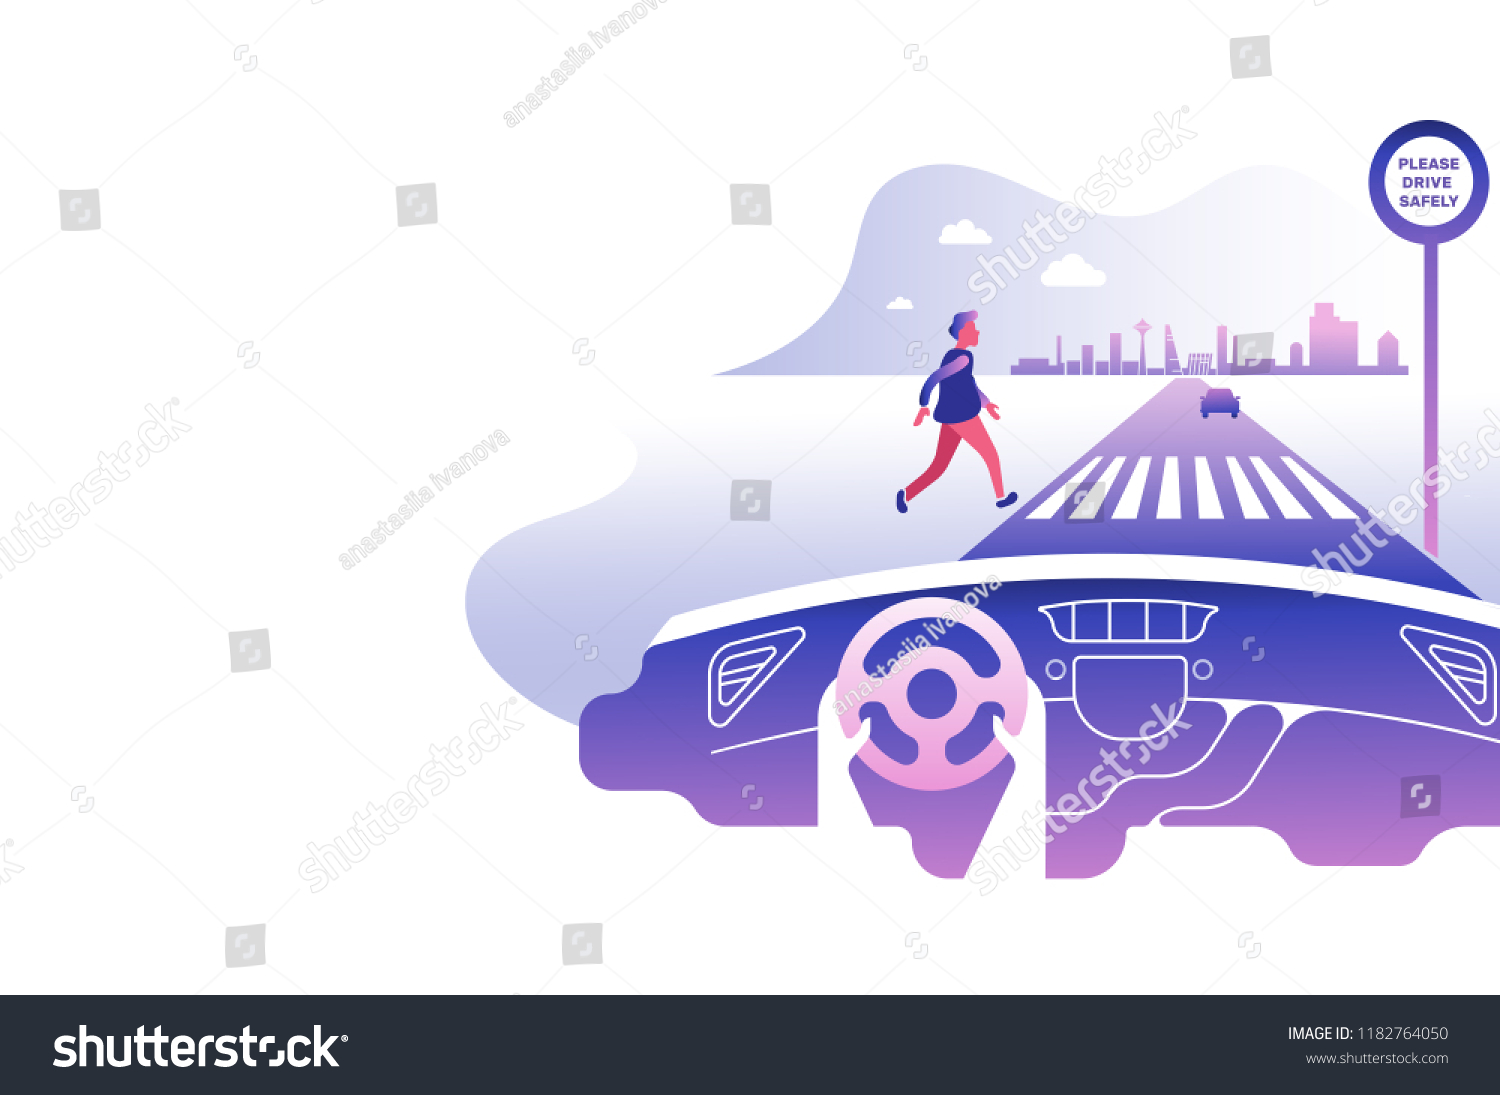 Dashboard car and driver.Hands driving a car on the highway. Drive safely warning billboard.Flat vector illustration. Car on asphalt road with speed limit on highway car interior.Gradient background